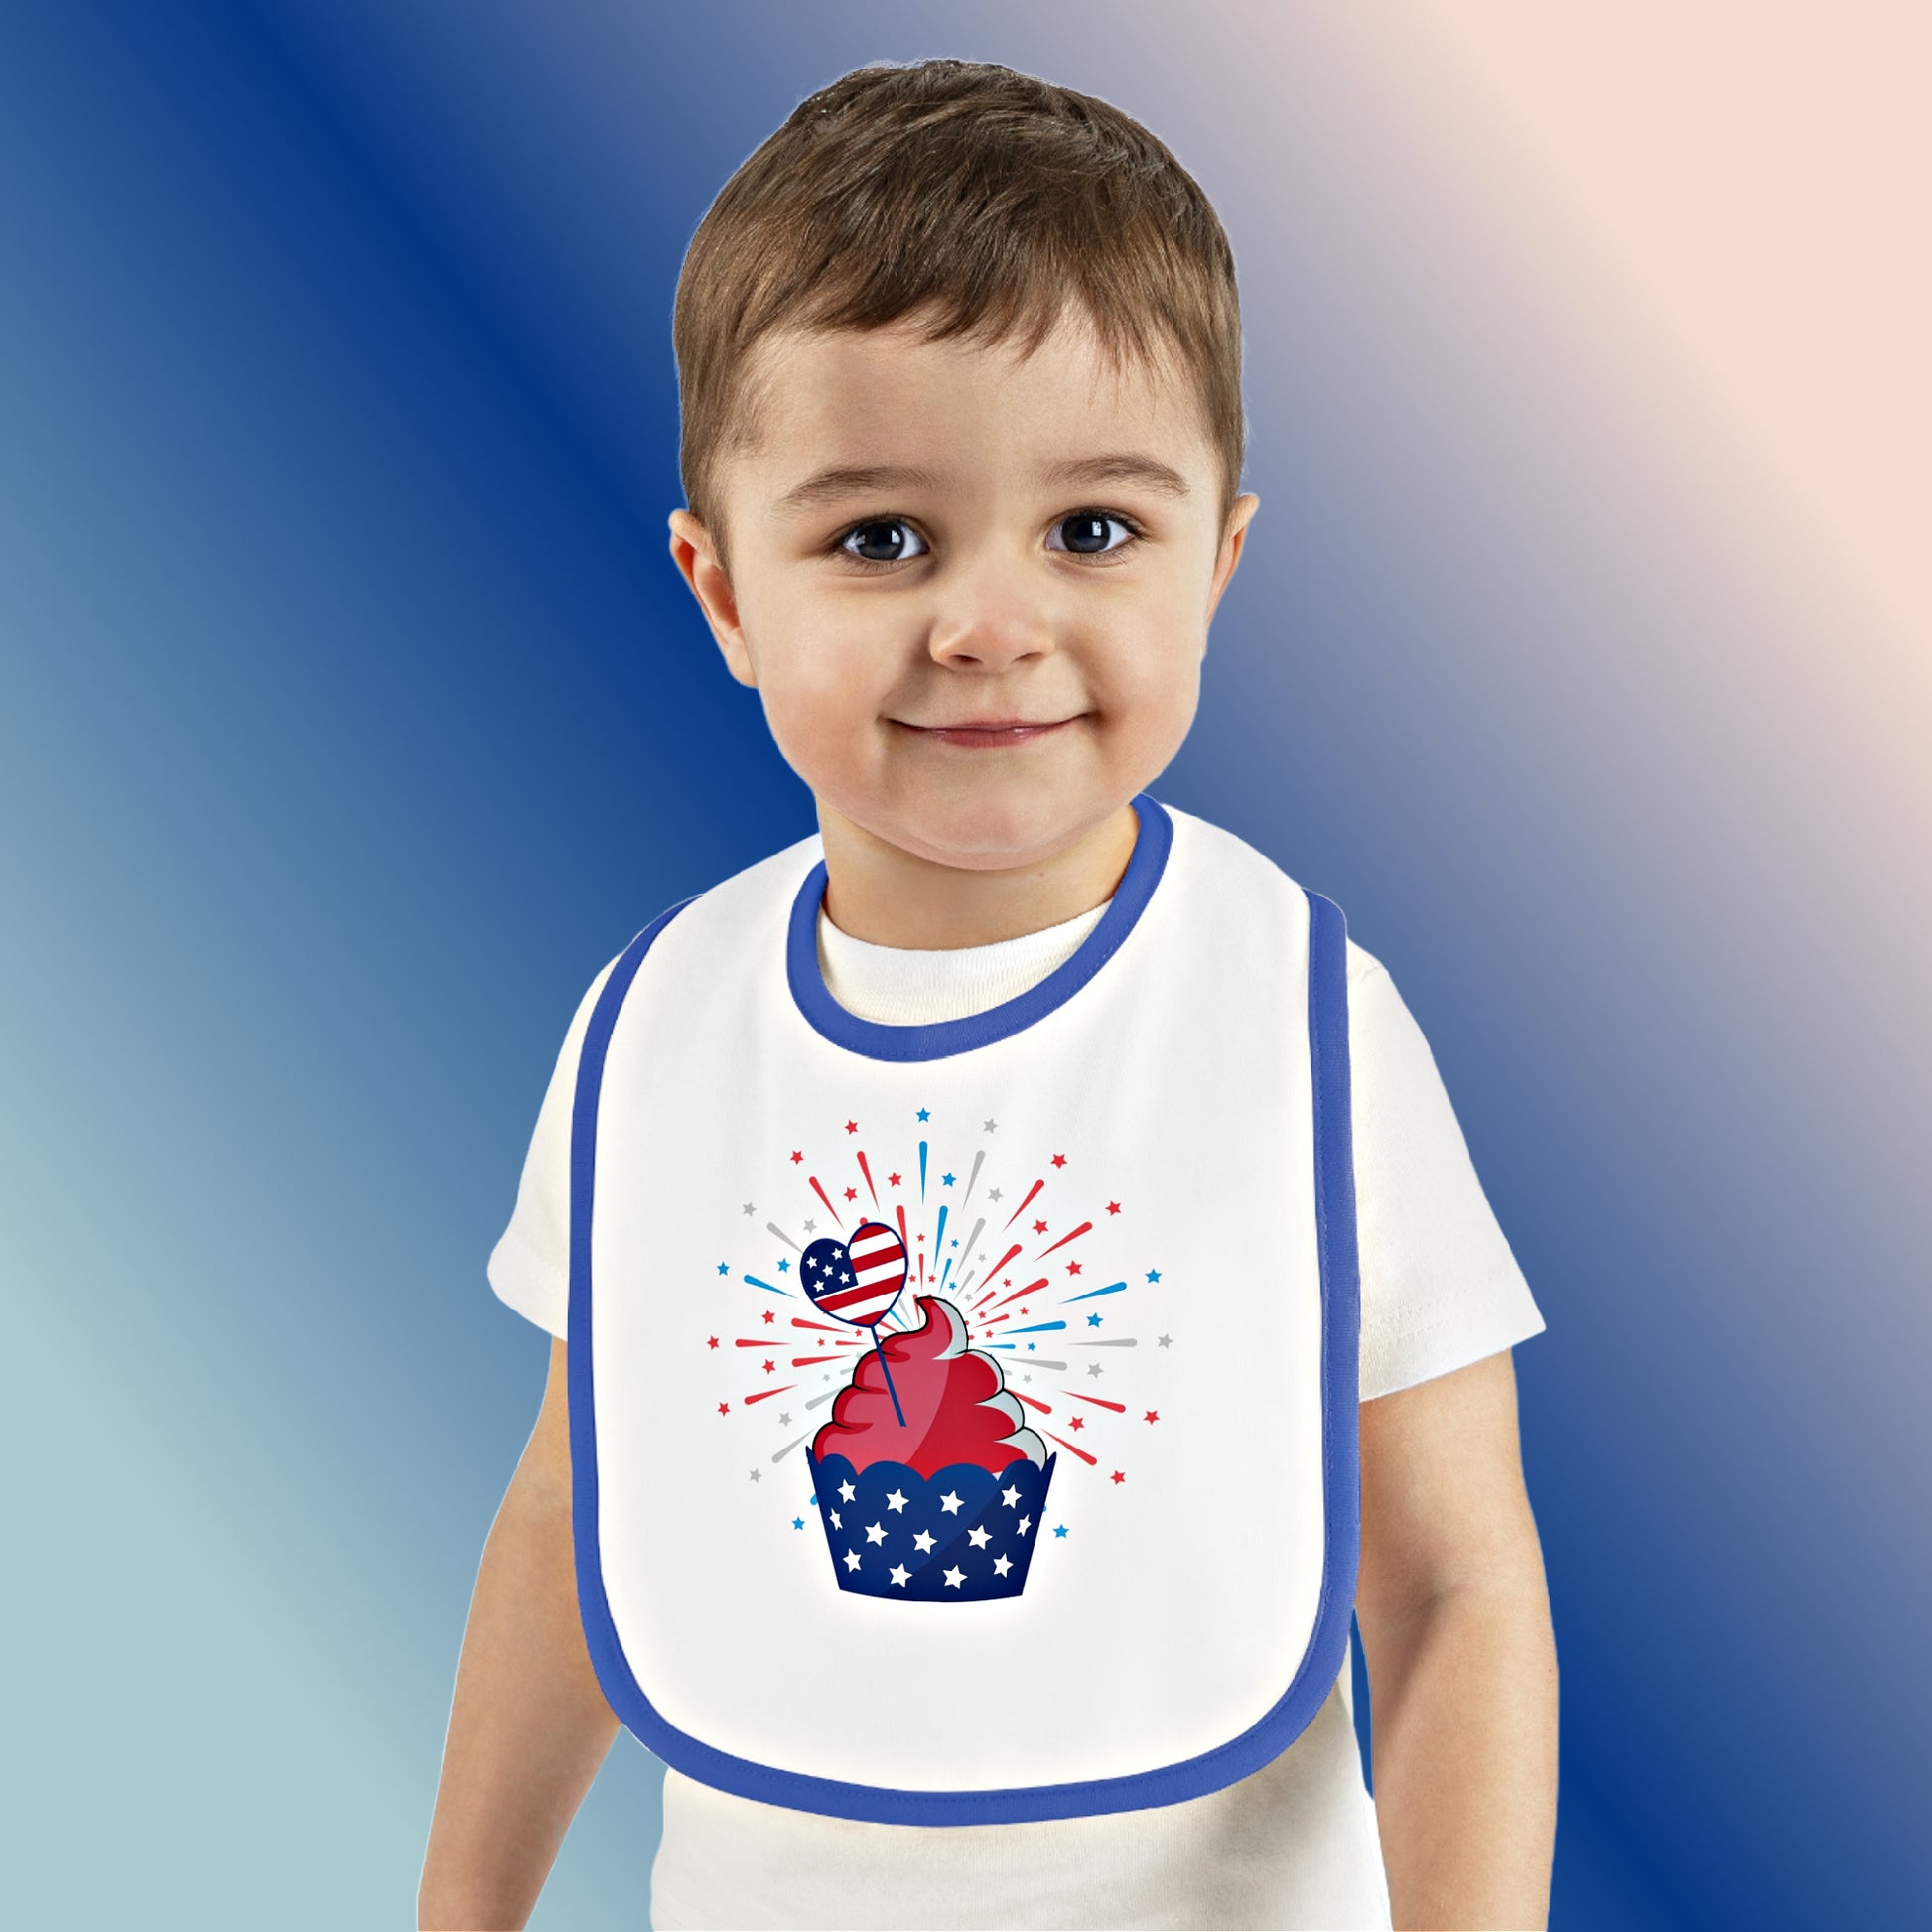 Mock up of a child wearing the bib with the blue trim